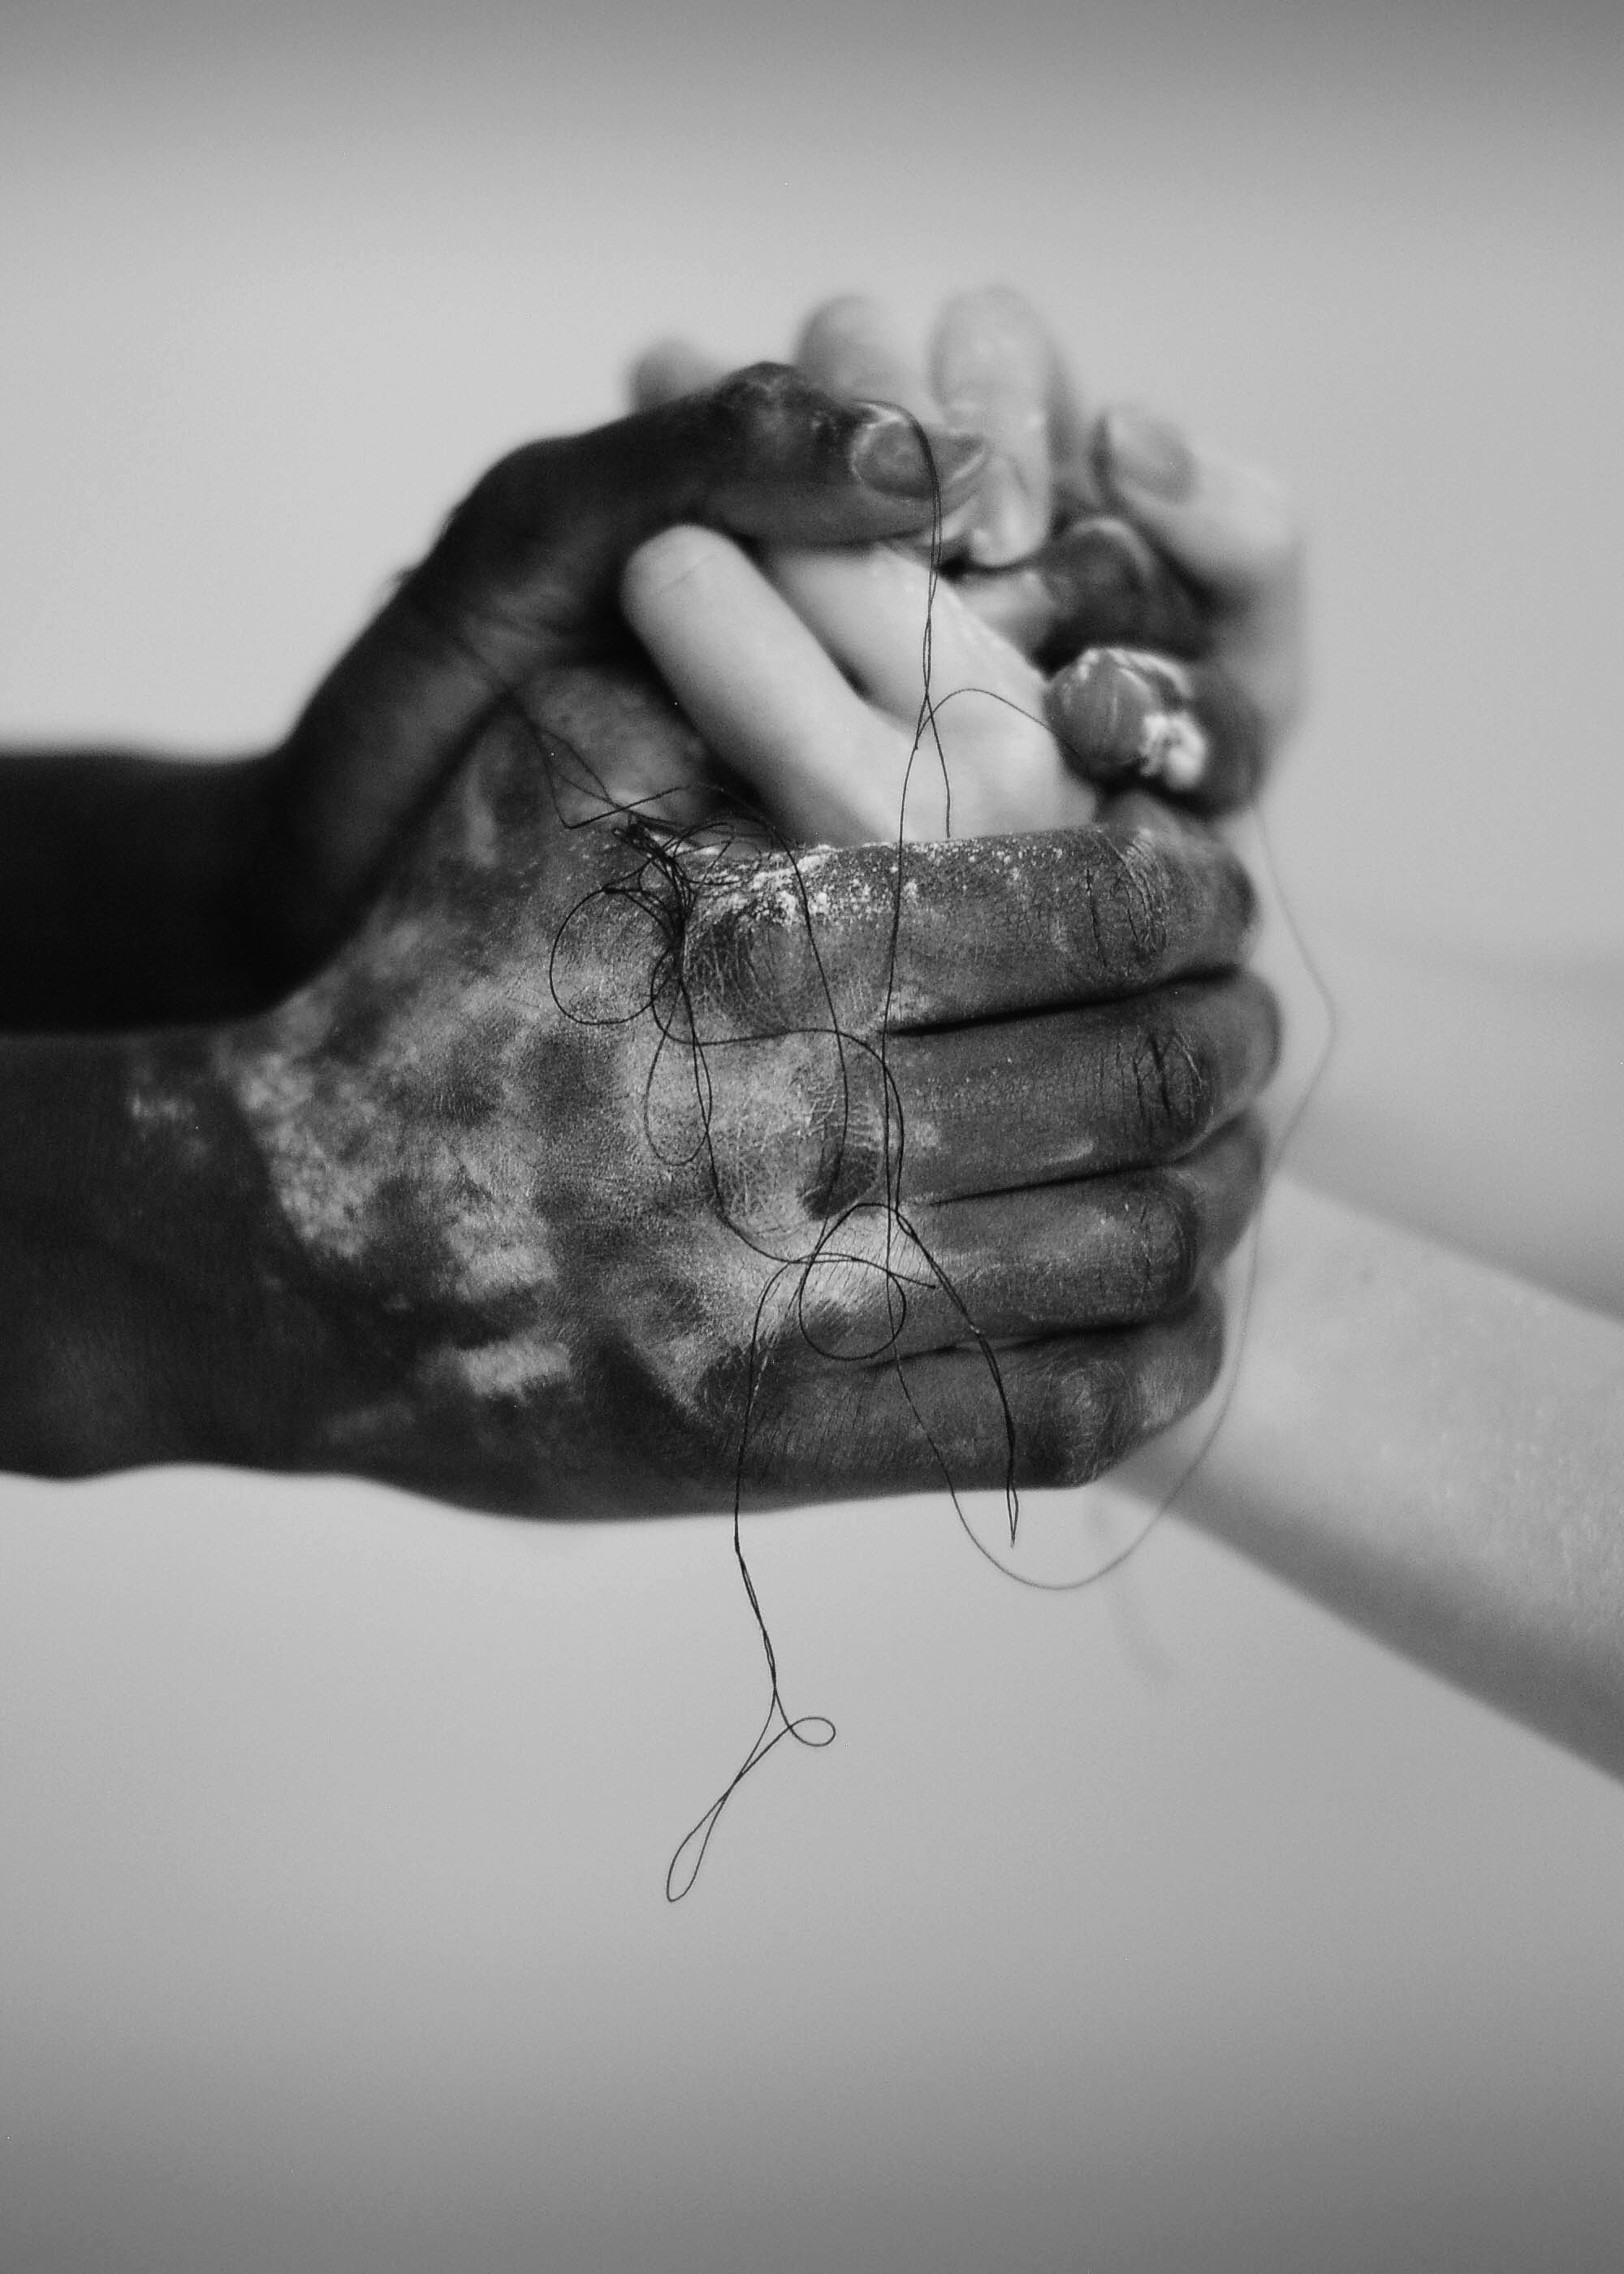 touching, communication, minimalism, hands, bw, chb, thread, touch, connection 4K